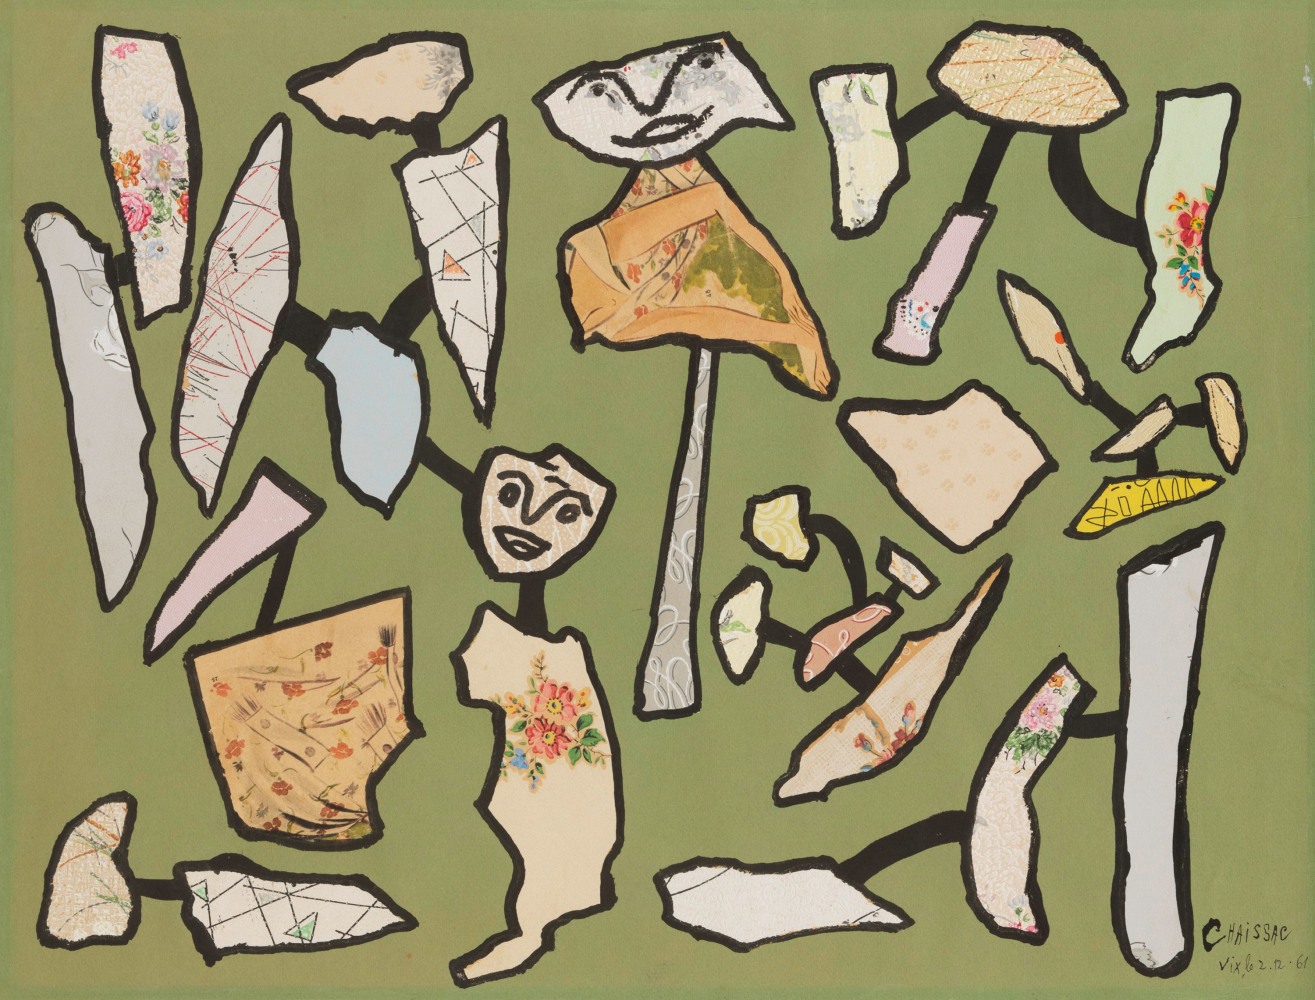 &amp;ldquo;Couple de personnages&amp;rdquo;, 1961
India ink, collage on paper
19 x 24 3/4 inches
48 x 63 cm
CHA 9